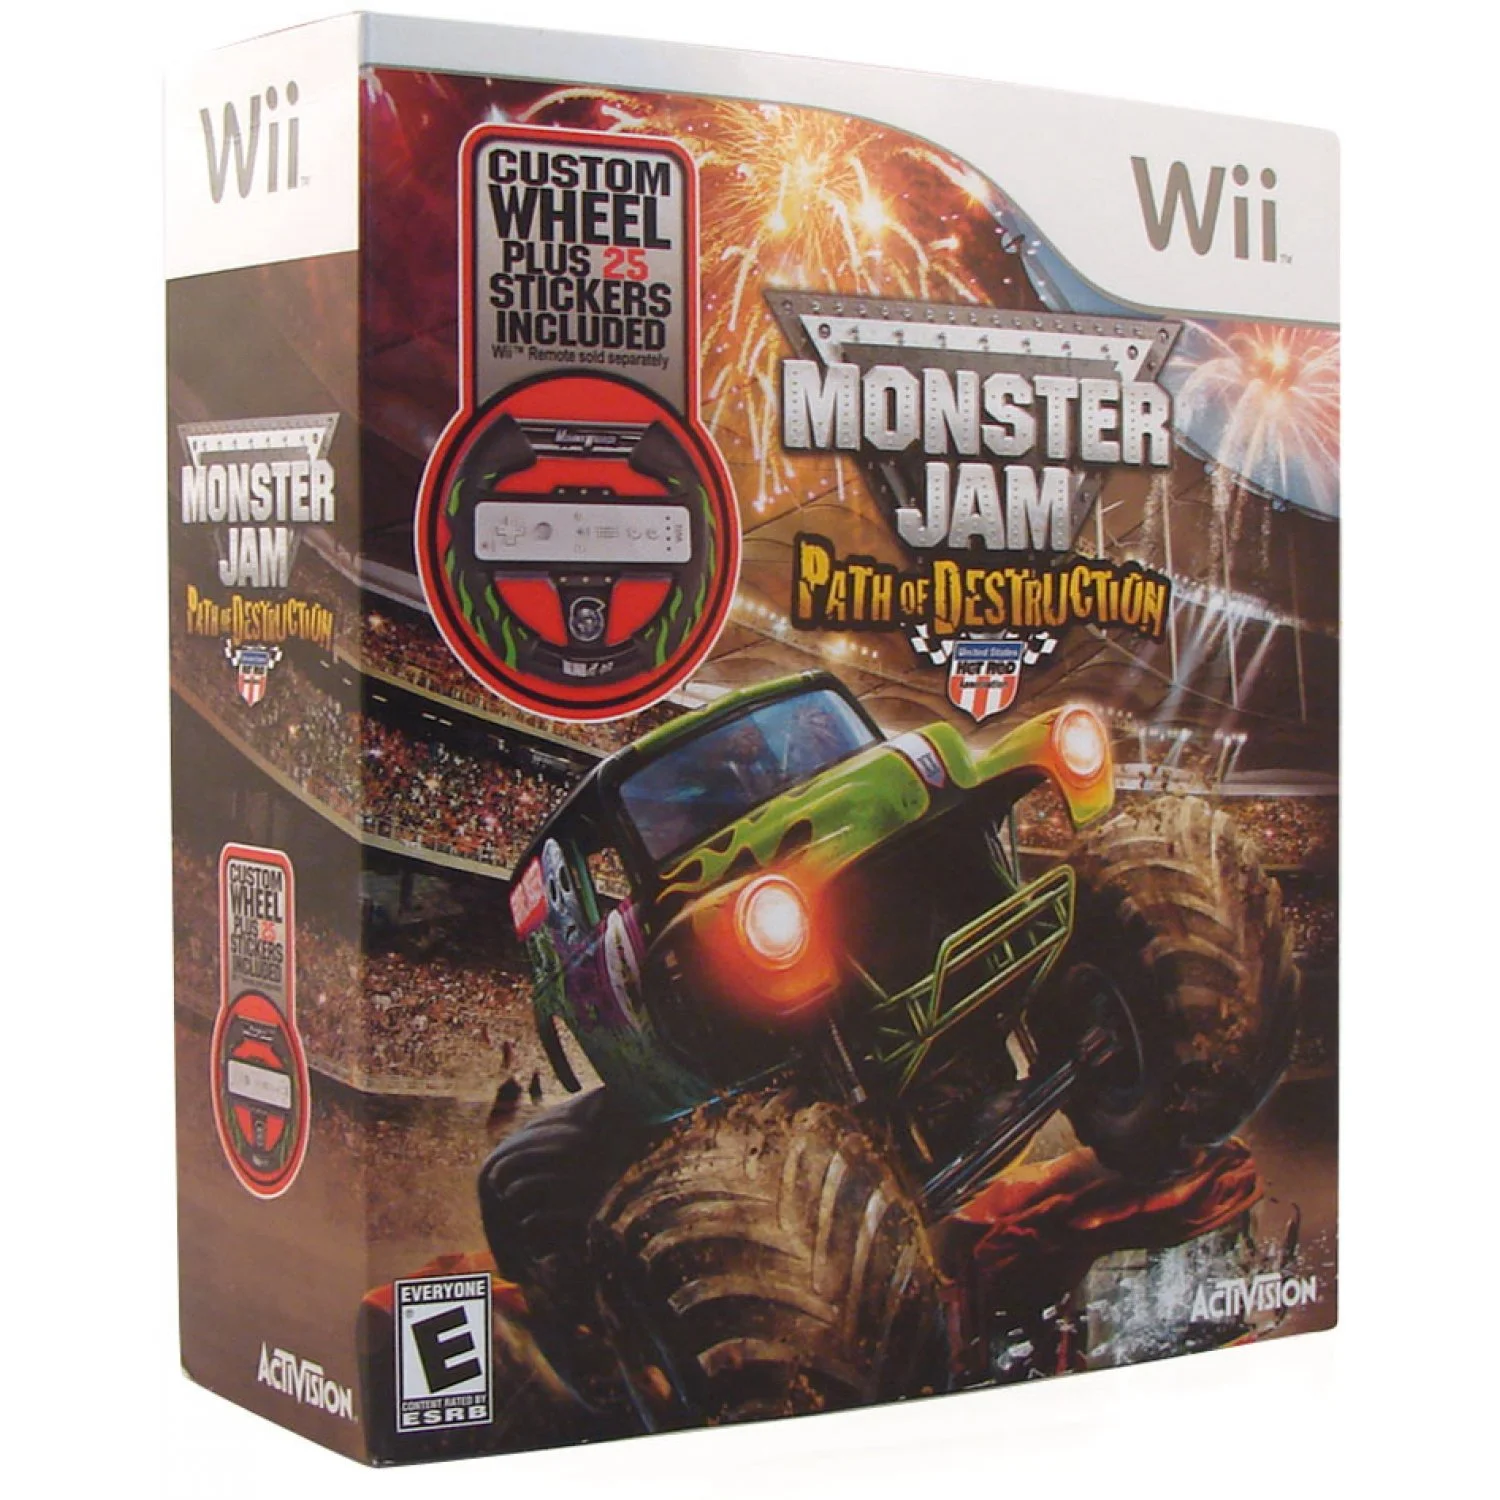  Activision Wii Grave Digger Monster Jam Wheel